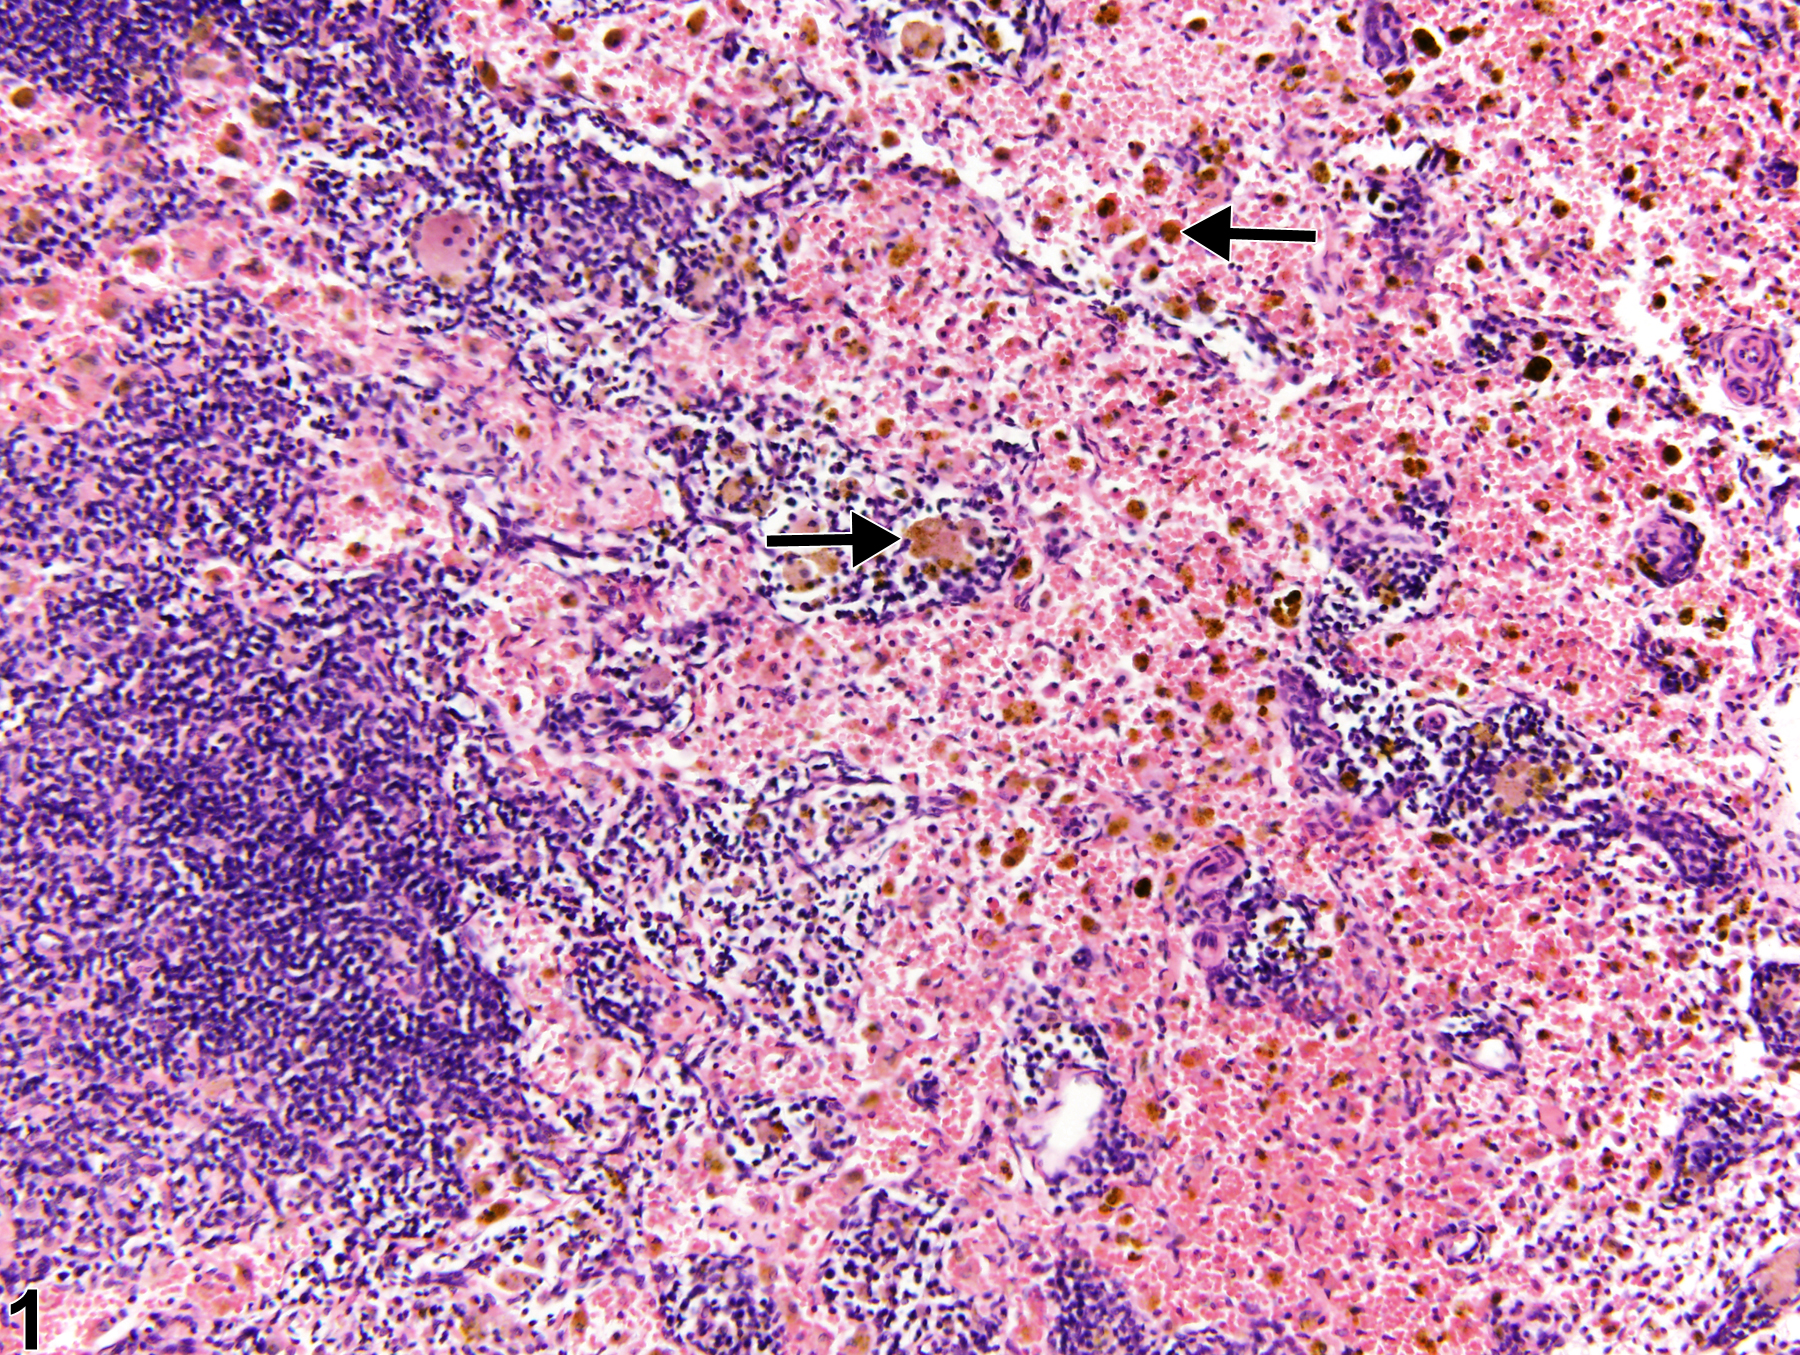 Image of pigment in the lymph node from a male Harlan Sprague-Dawley rat in a chronic study